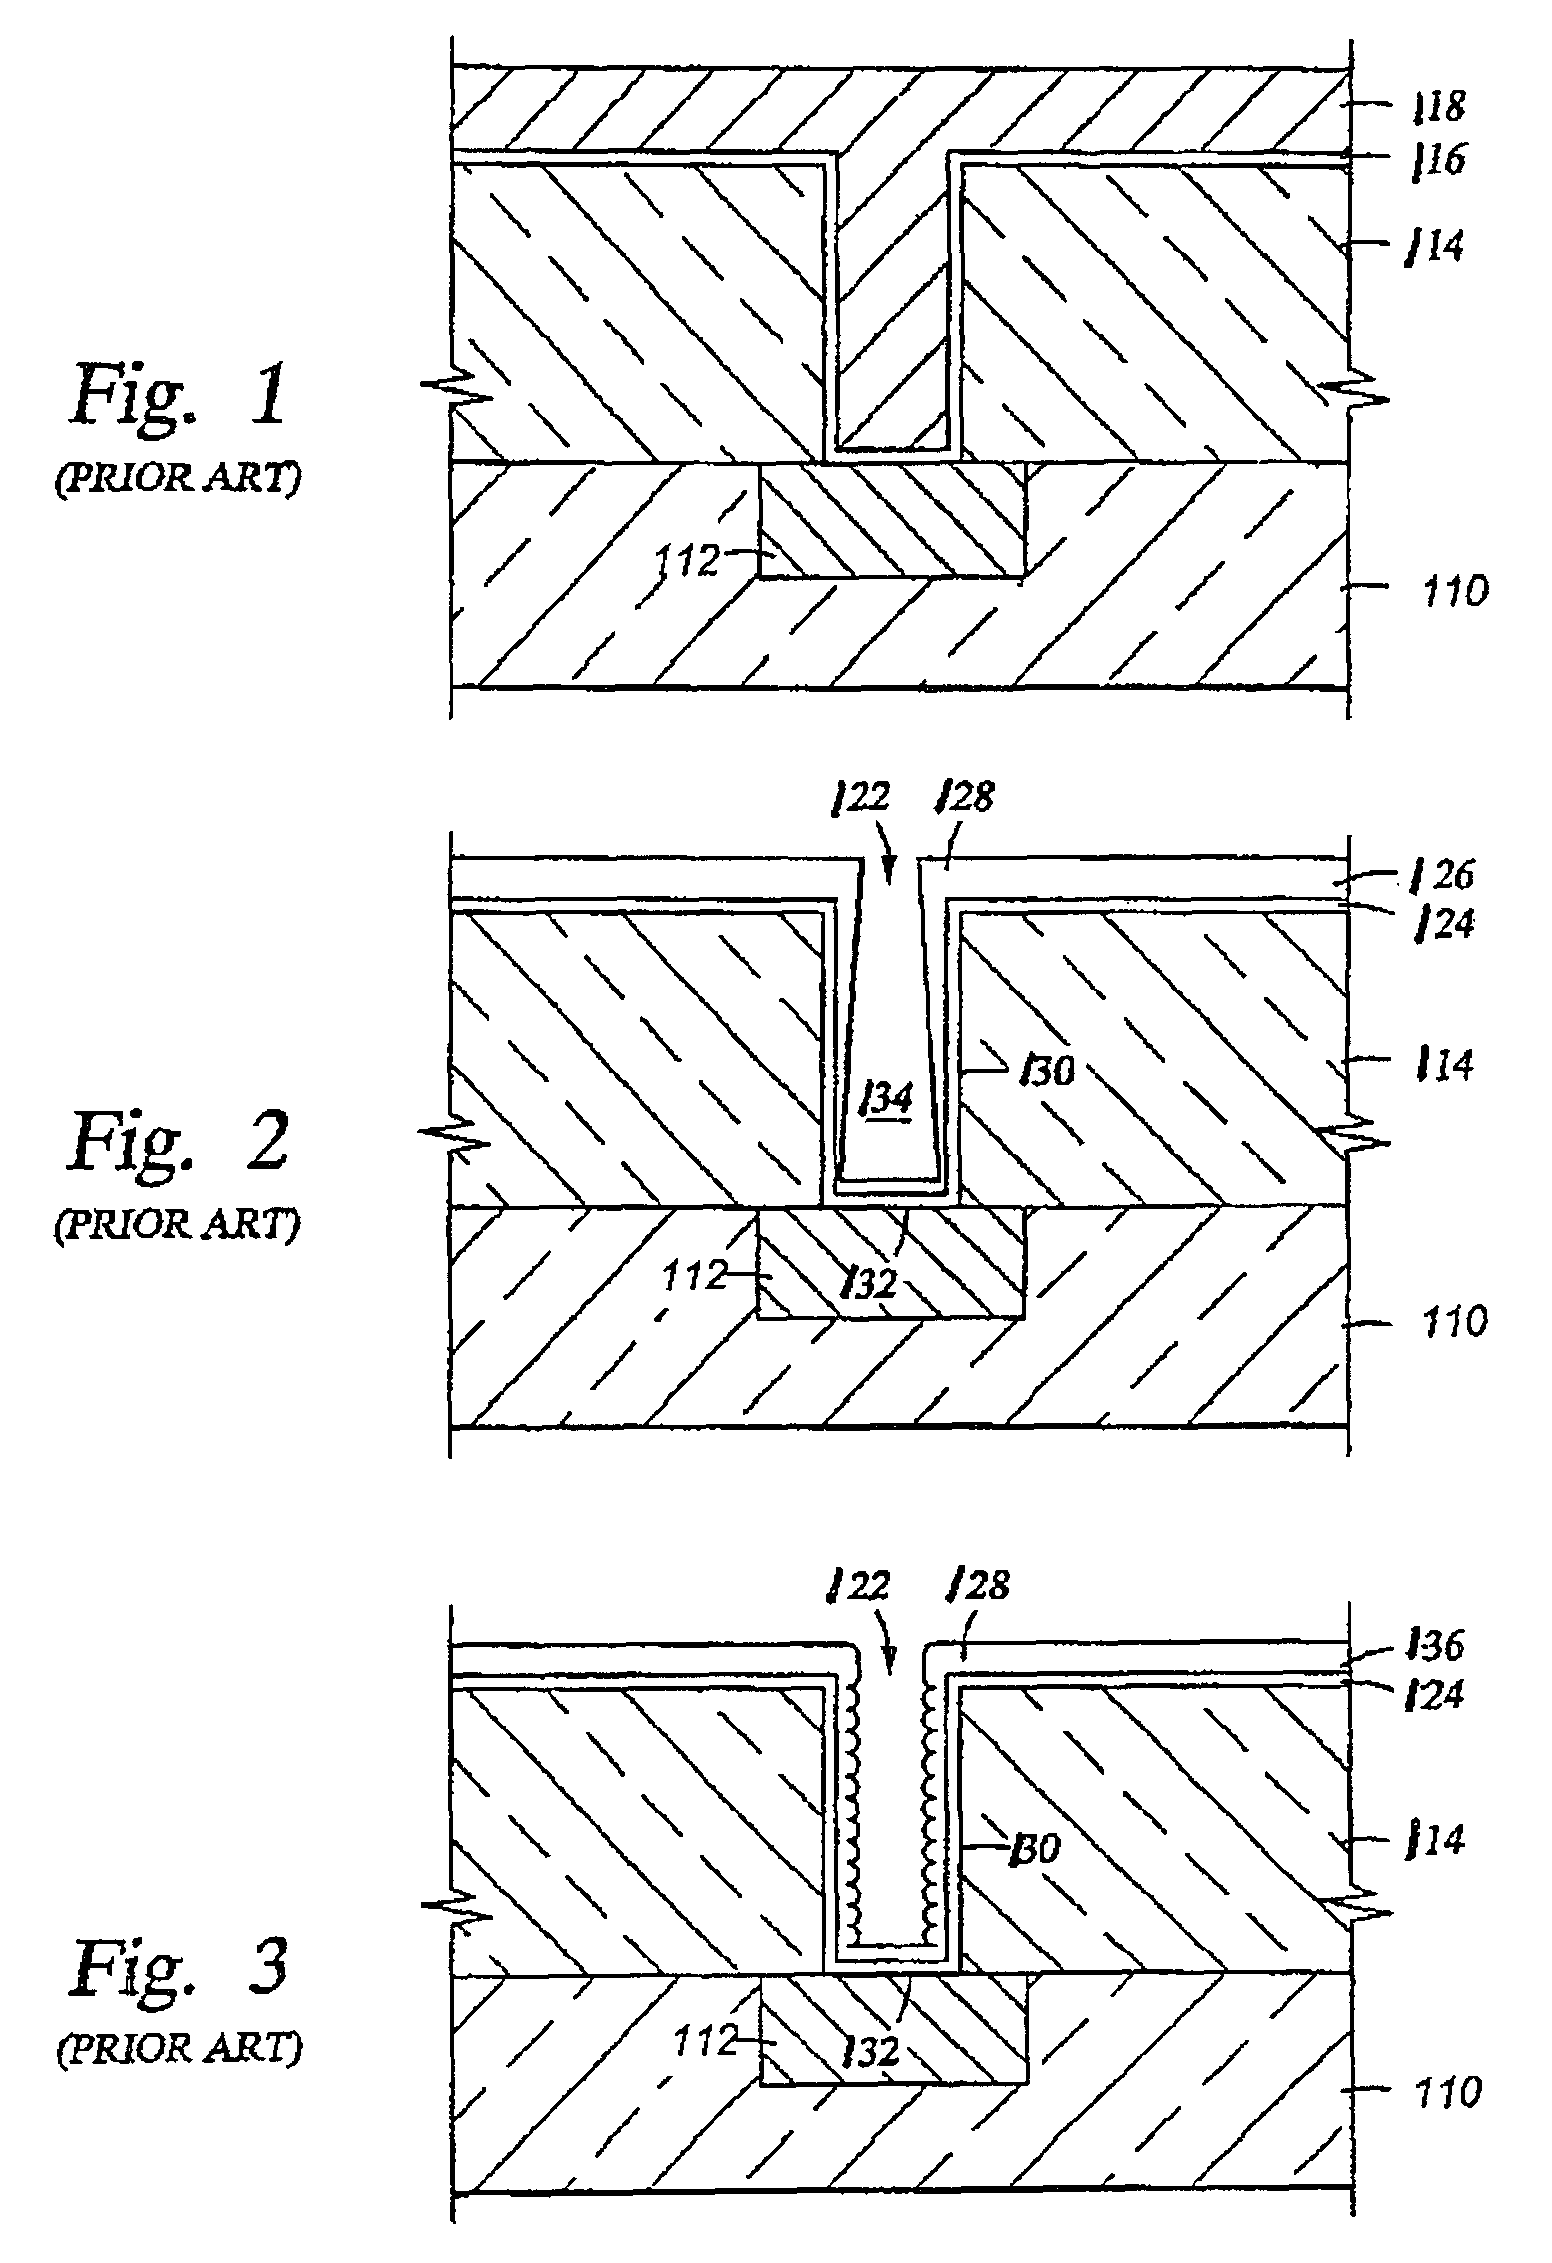 Self-ionized and capacitively-coupled plasma for sputtering and resputtering